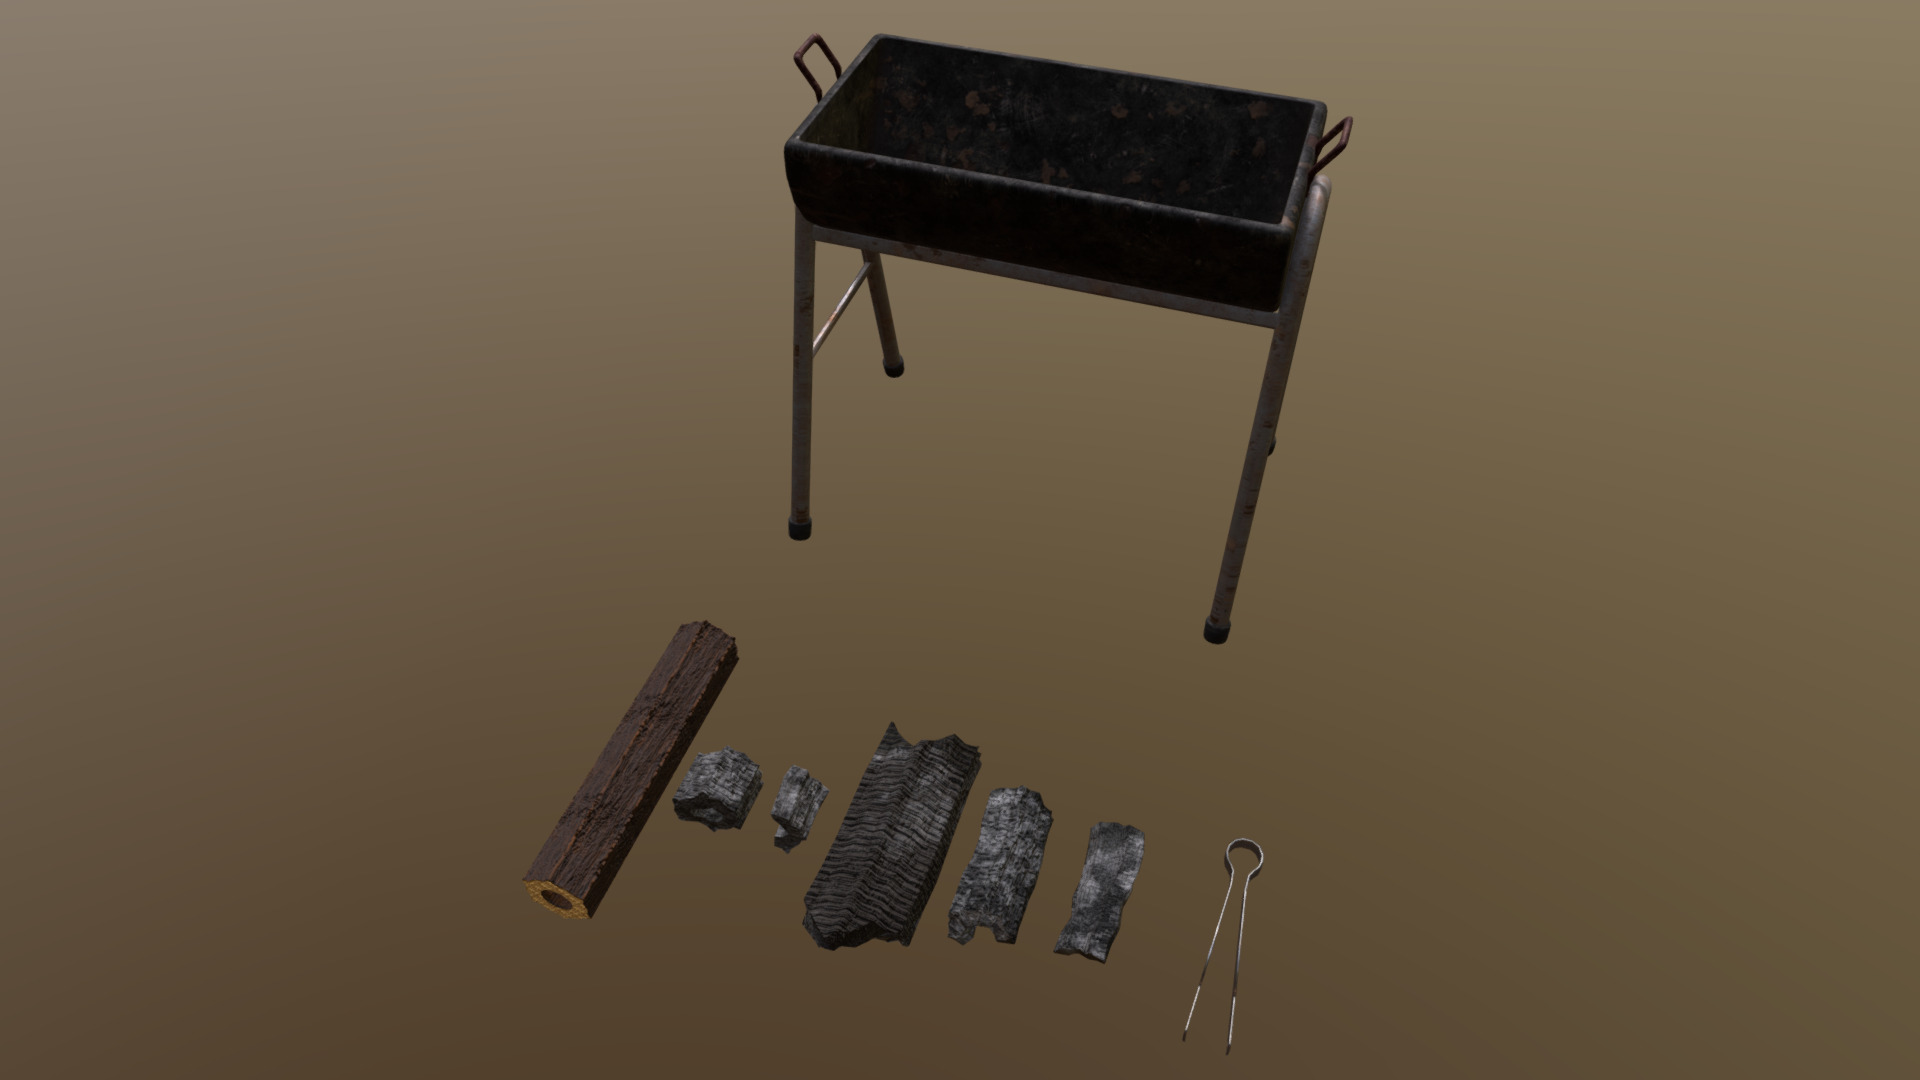 3D model HIE Grill Set D180302 - This is a 3D model of the HIE Grill Set D180302. The 3D model is about a table with tools on it.